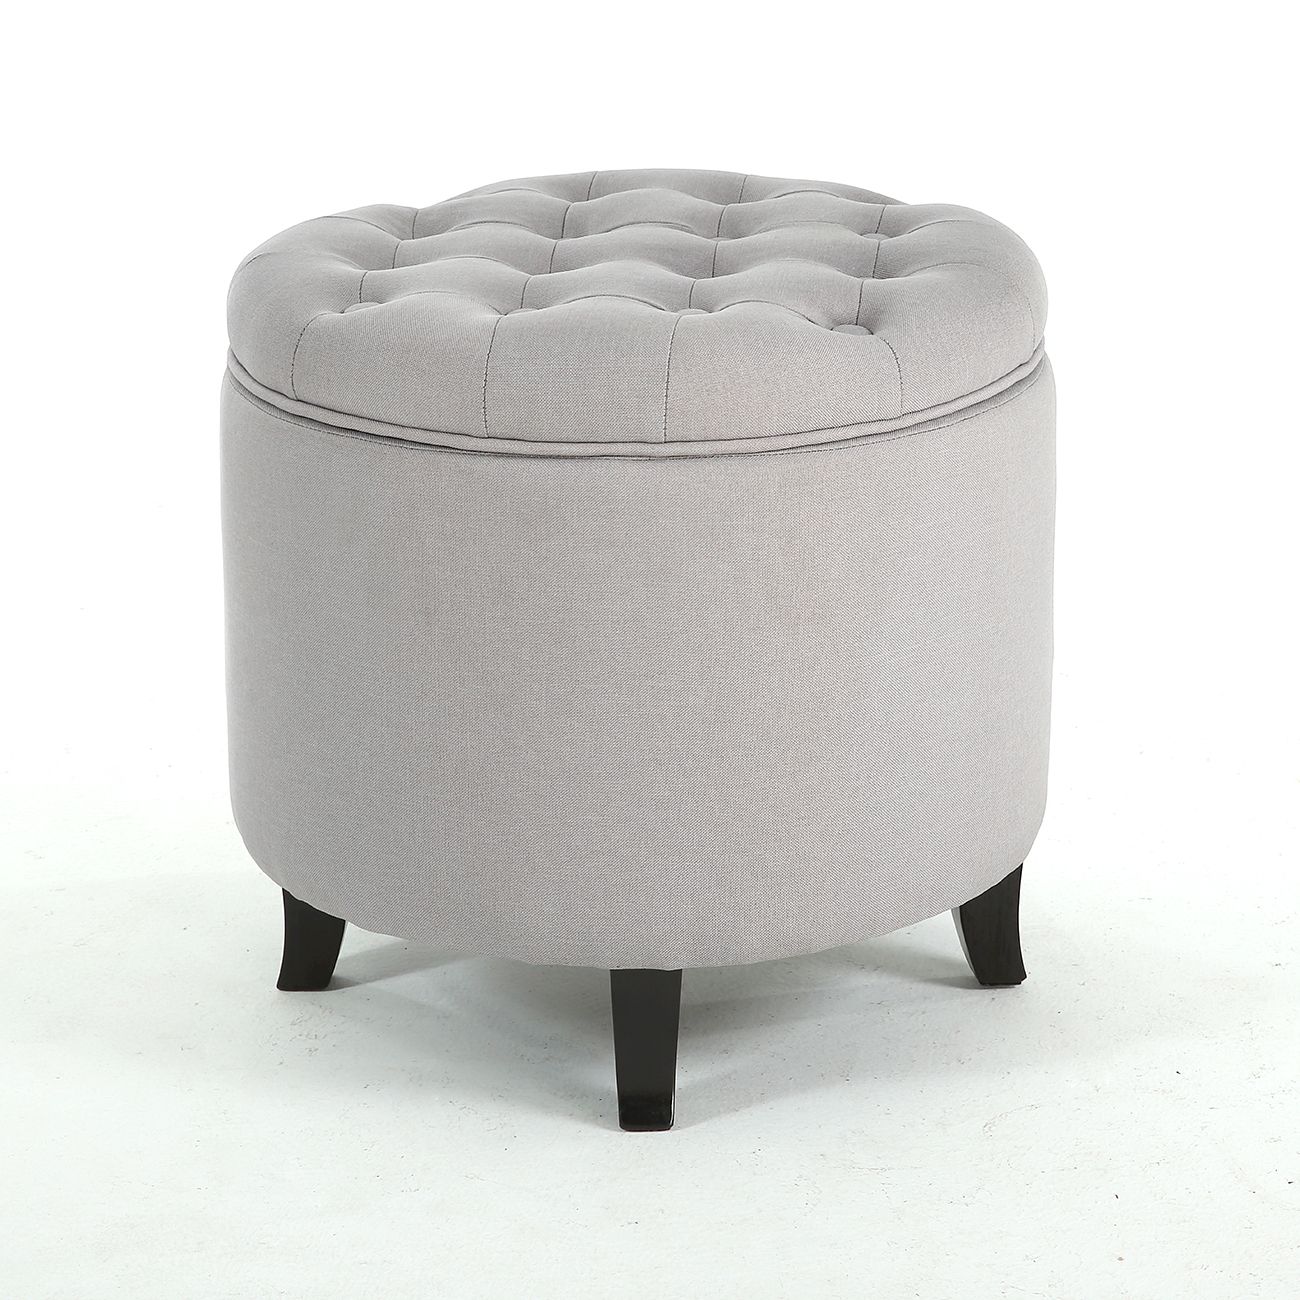 Favorite Round Gray Faux Leather Ottomans With Pull Tab For Classic Storage Ottoman Seat Nailhead Trim Large Round Tufted Table (View 9 of 10)